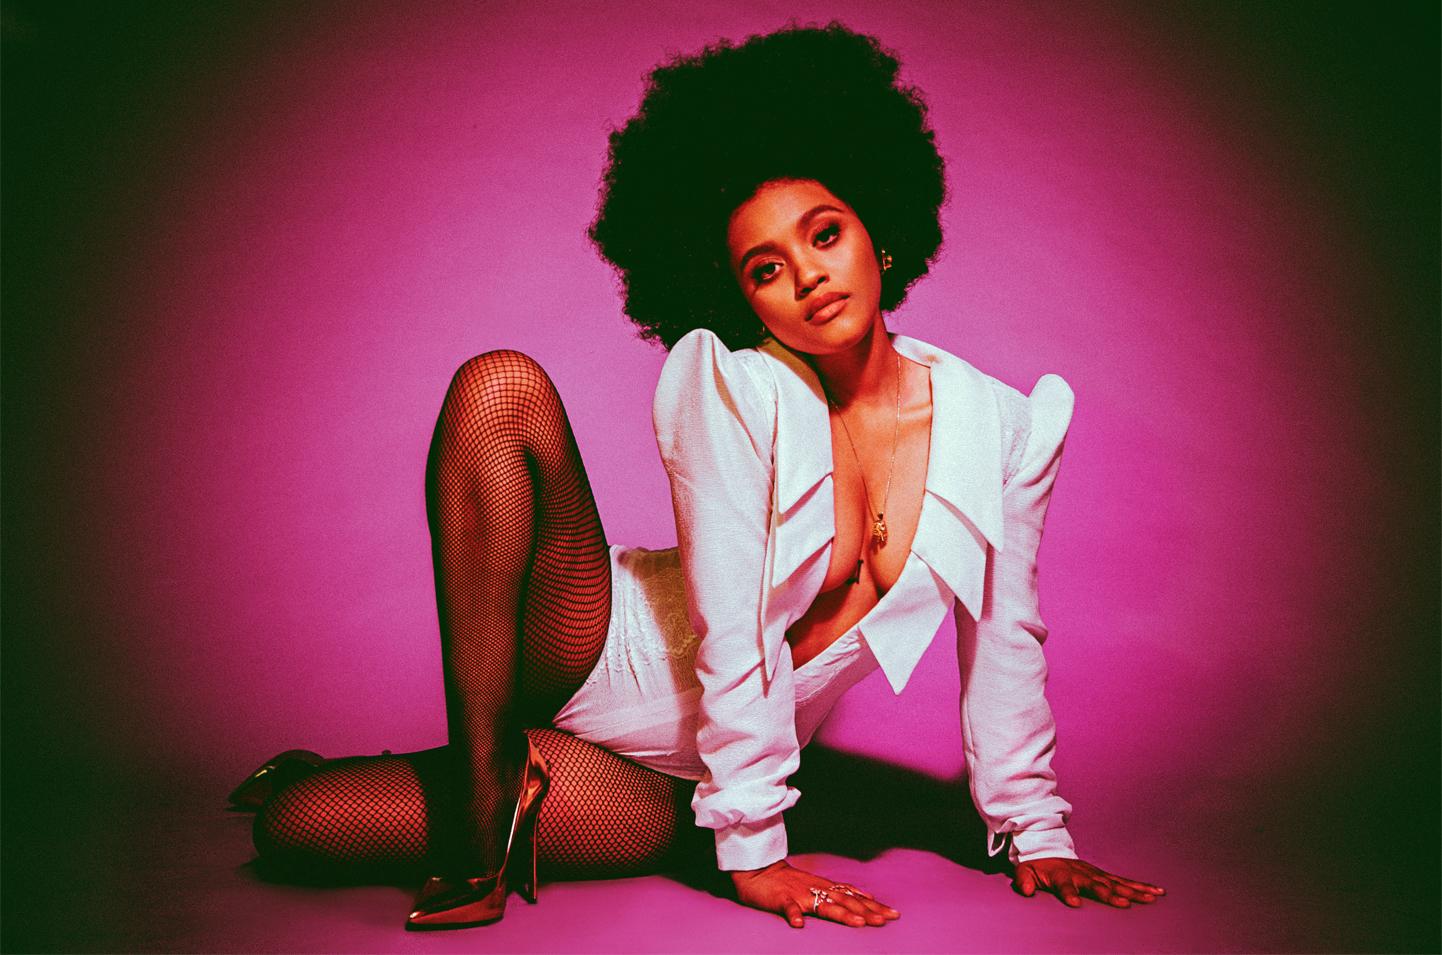 50+ Hot Pictures Of Kiersey Clemons – Iris West Actress In Upcoming Flash Movie | Best Of Comic Books